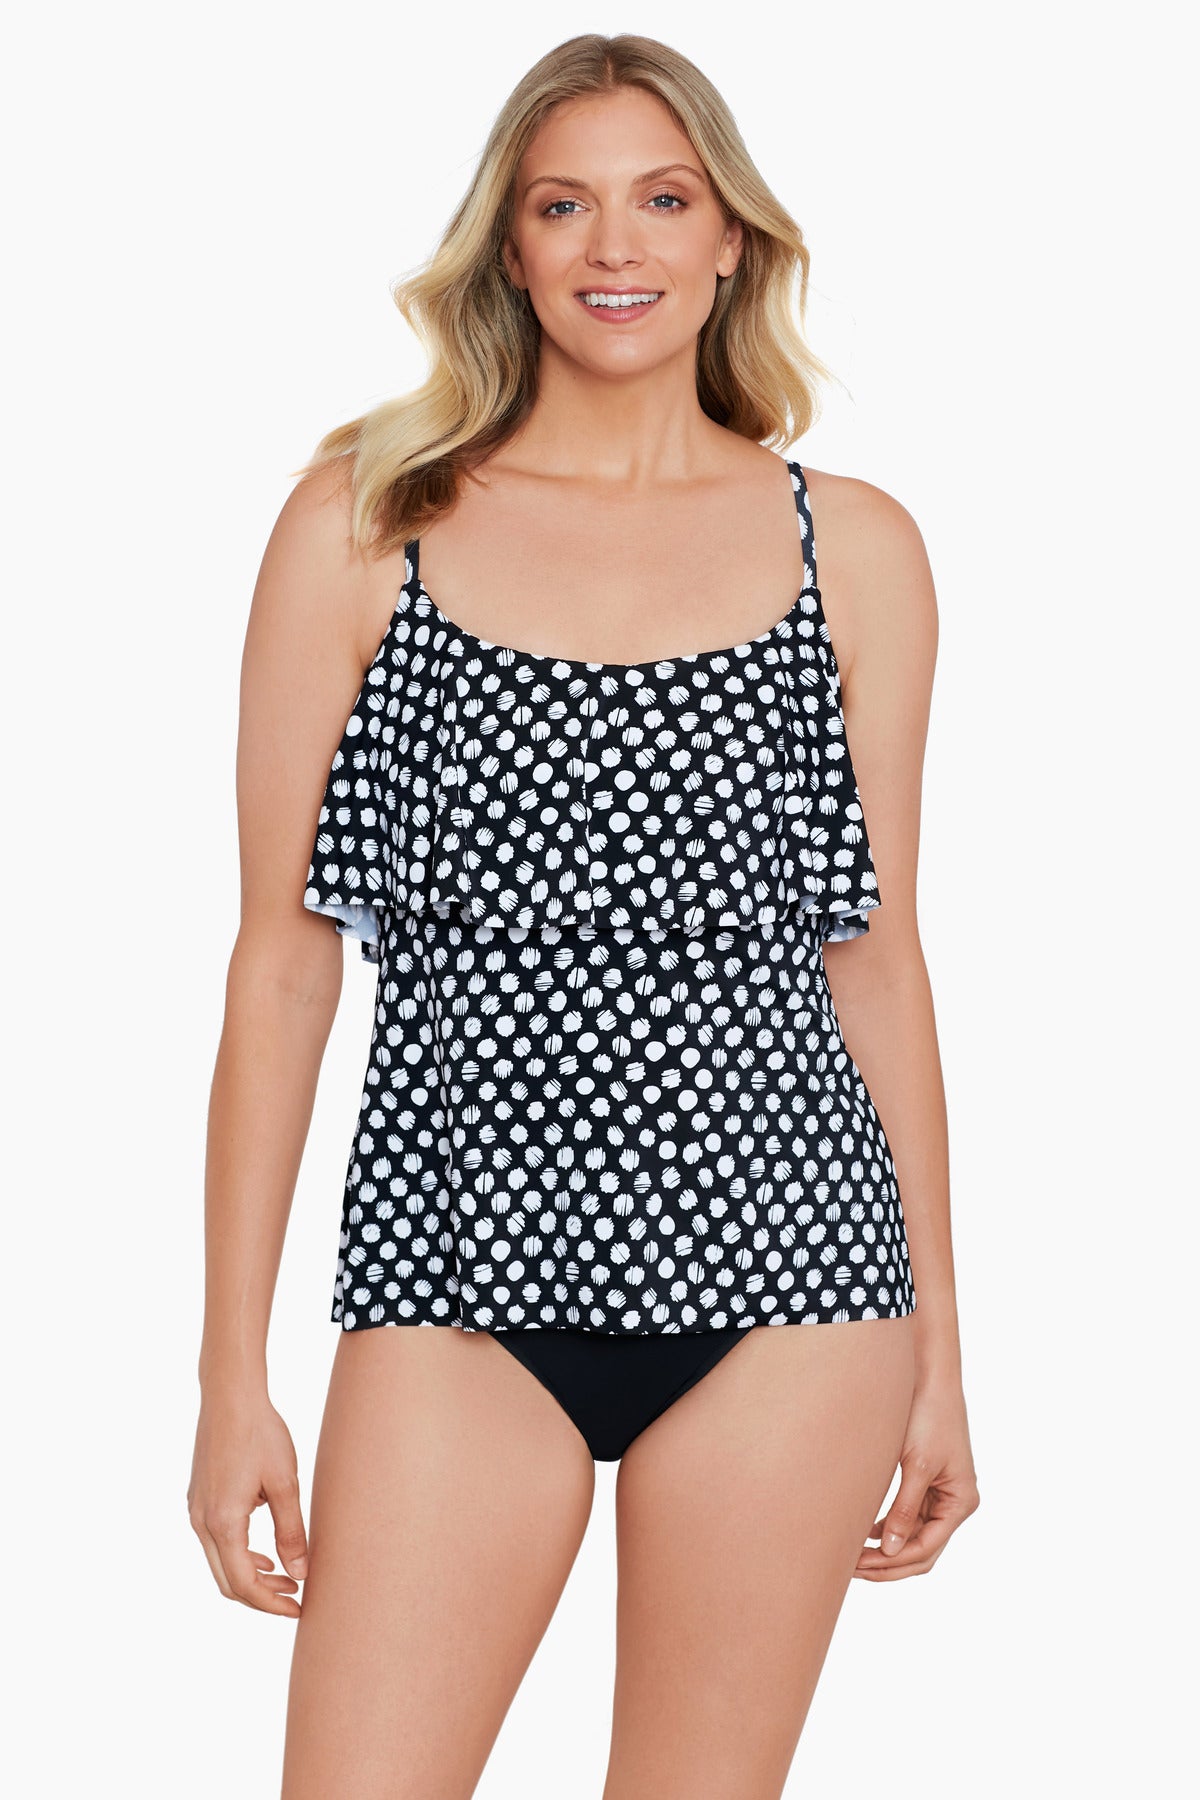 Complete Shaping, mastectomy clothing - Comfortable mastectomy tops &  swimwear with built-in breast prosthetics created by a breast cancer  survivor. It's all-inclusive, so no need to purchase additional breast  forms & no